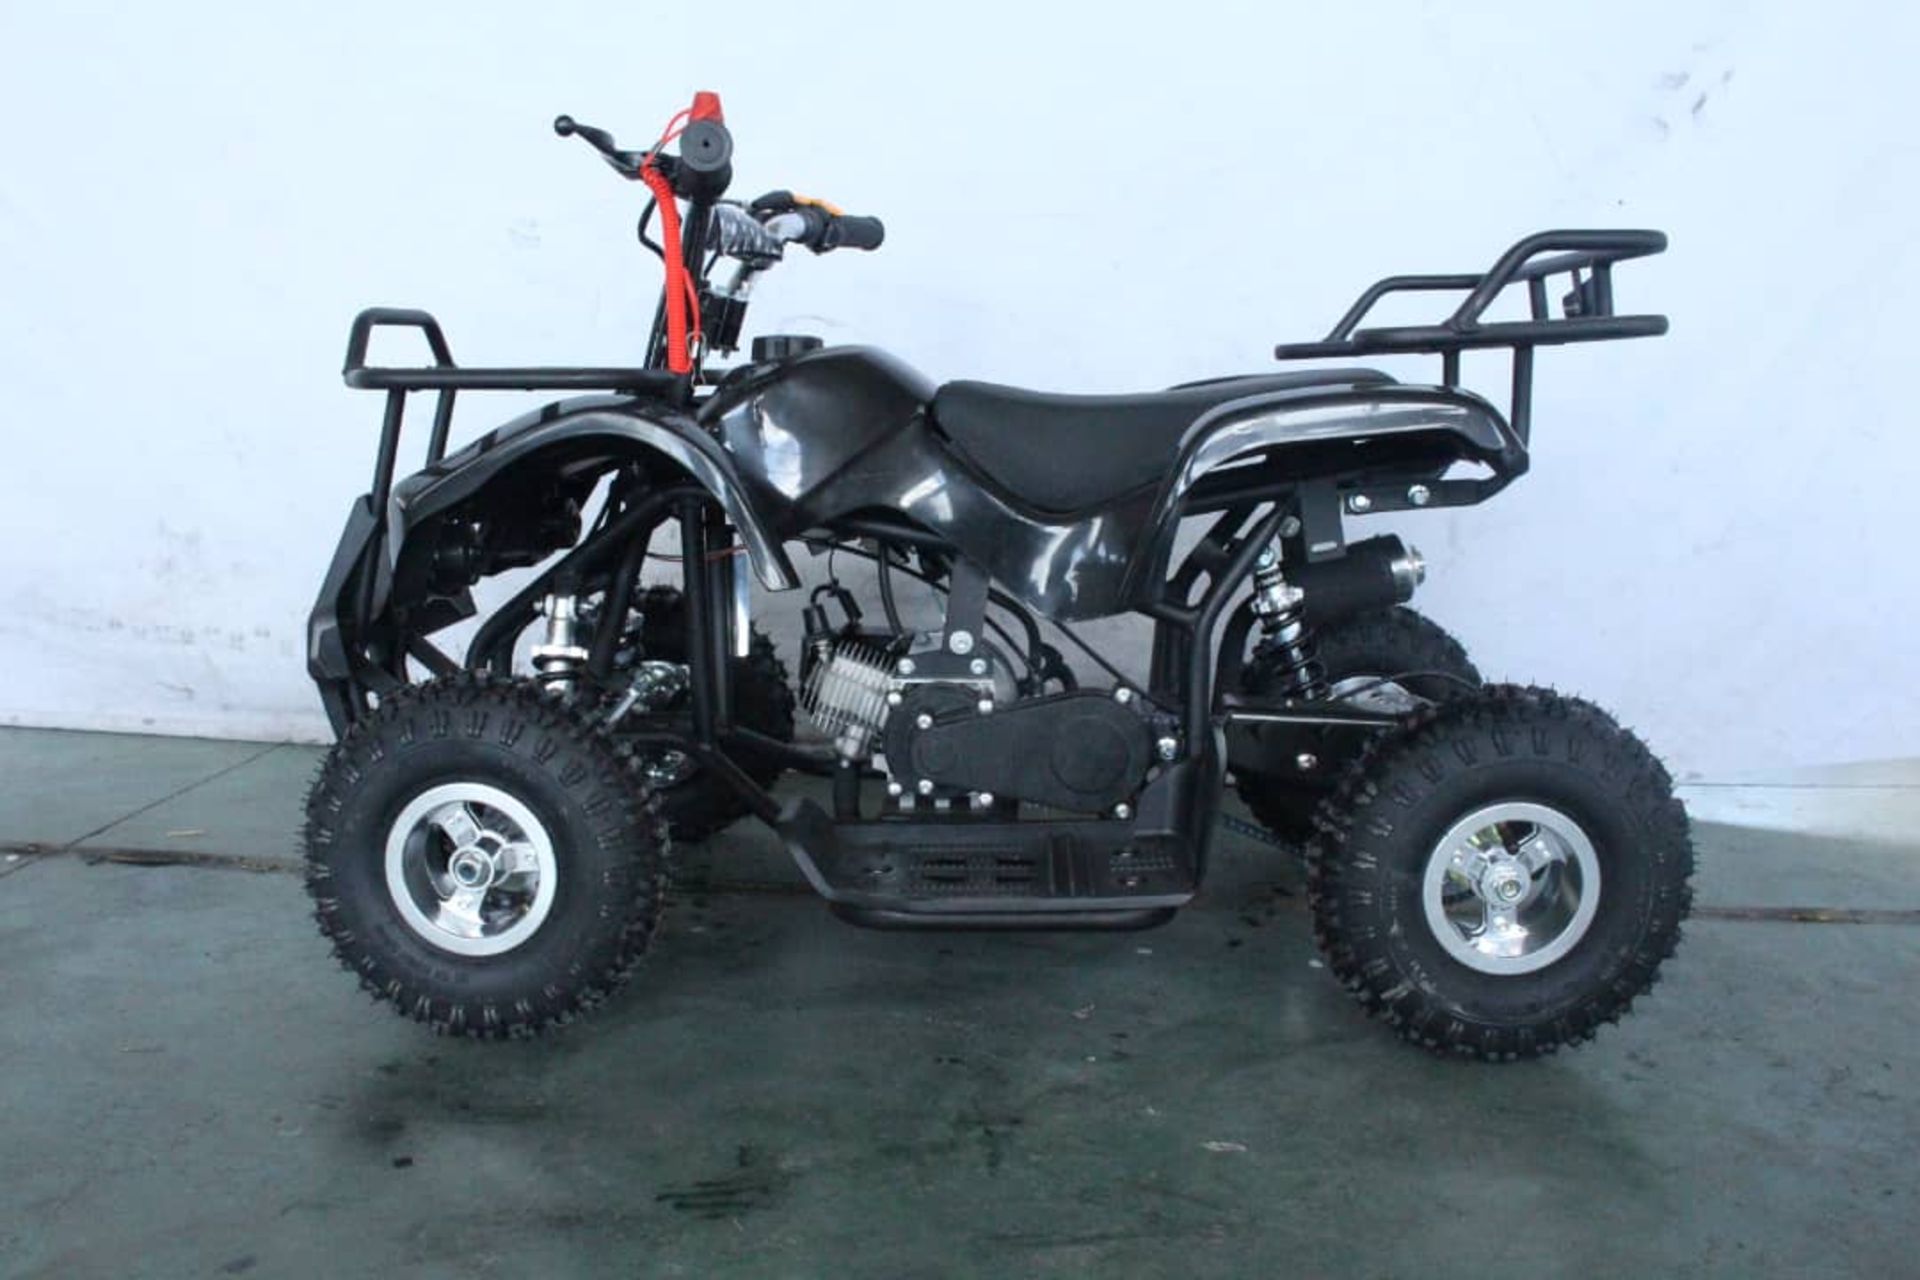 + VAT Brand New 50cc Mini Quad Bike FRM - Colours May Vary - Picture May Vary From Actual Item - Bild 5 aus 9